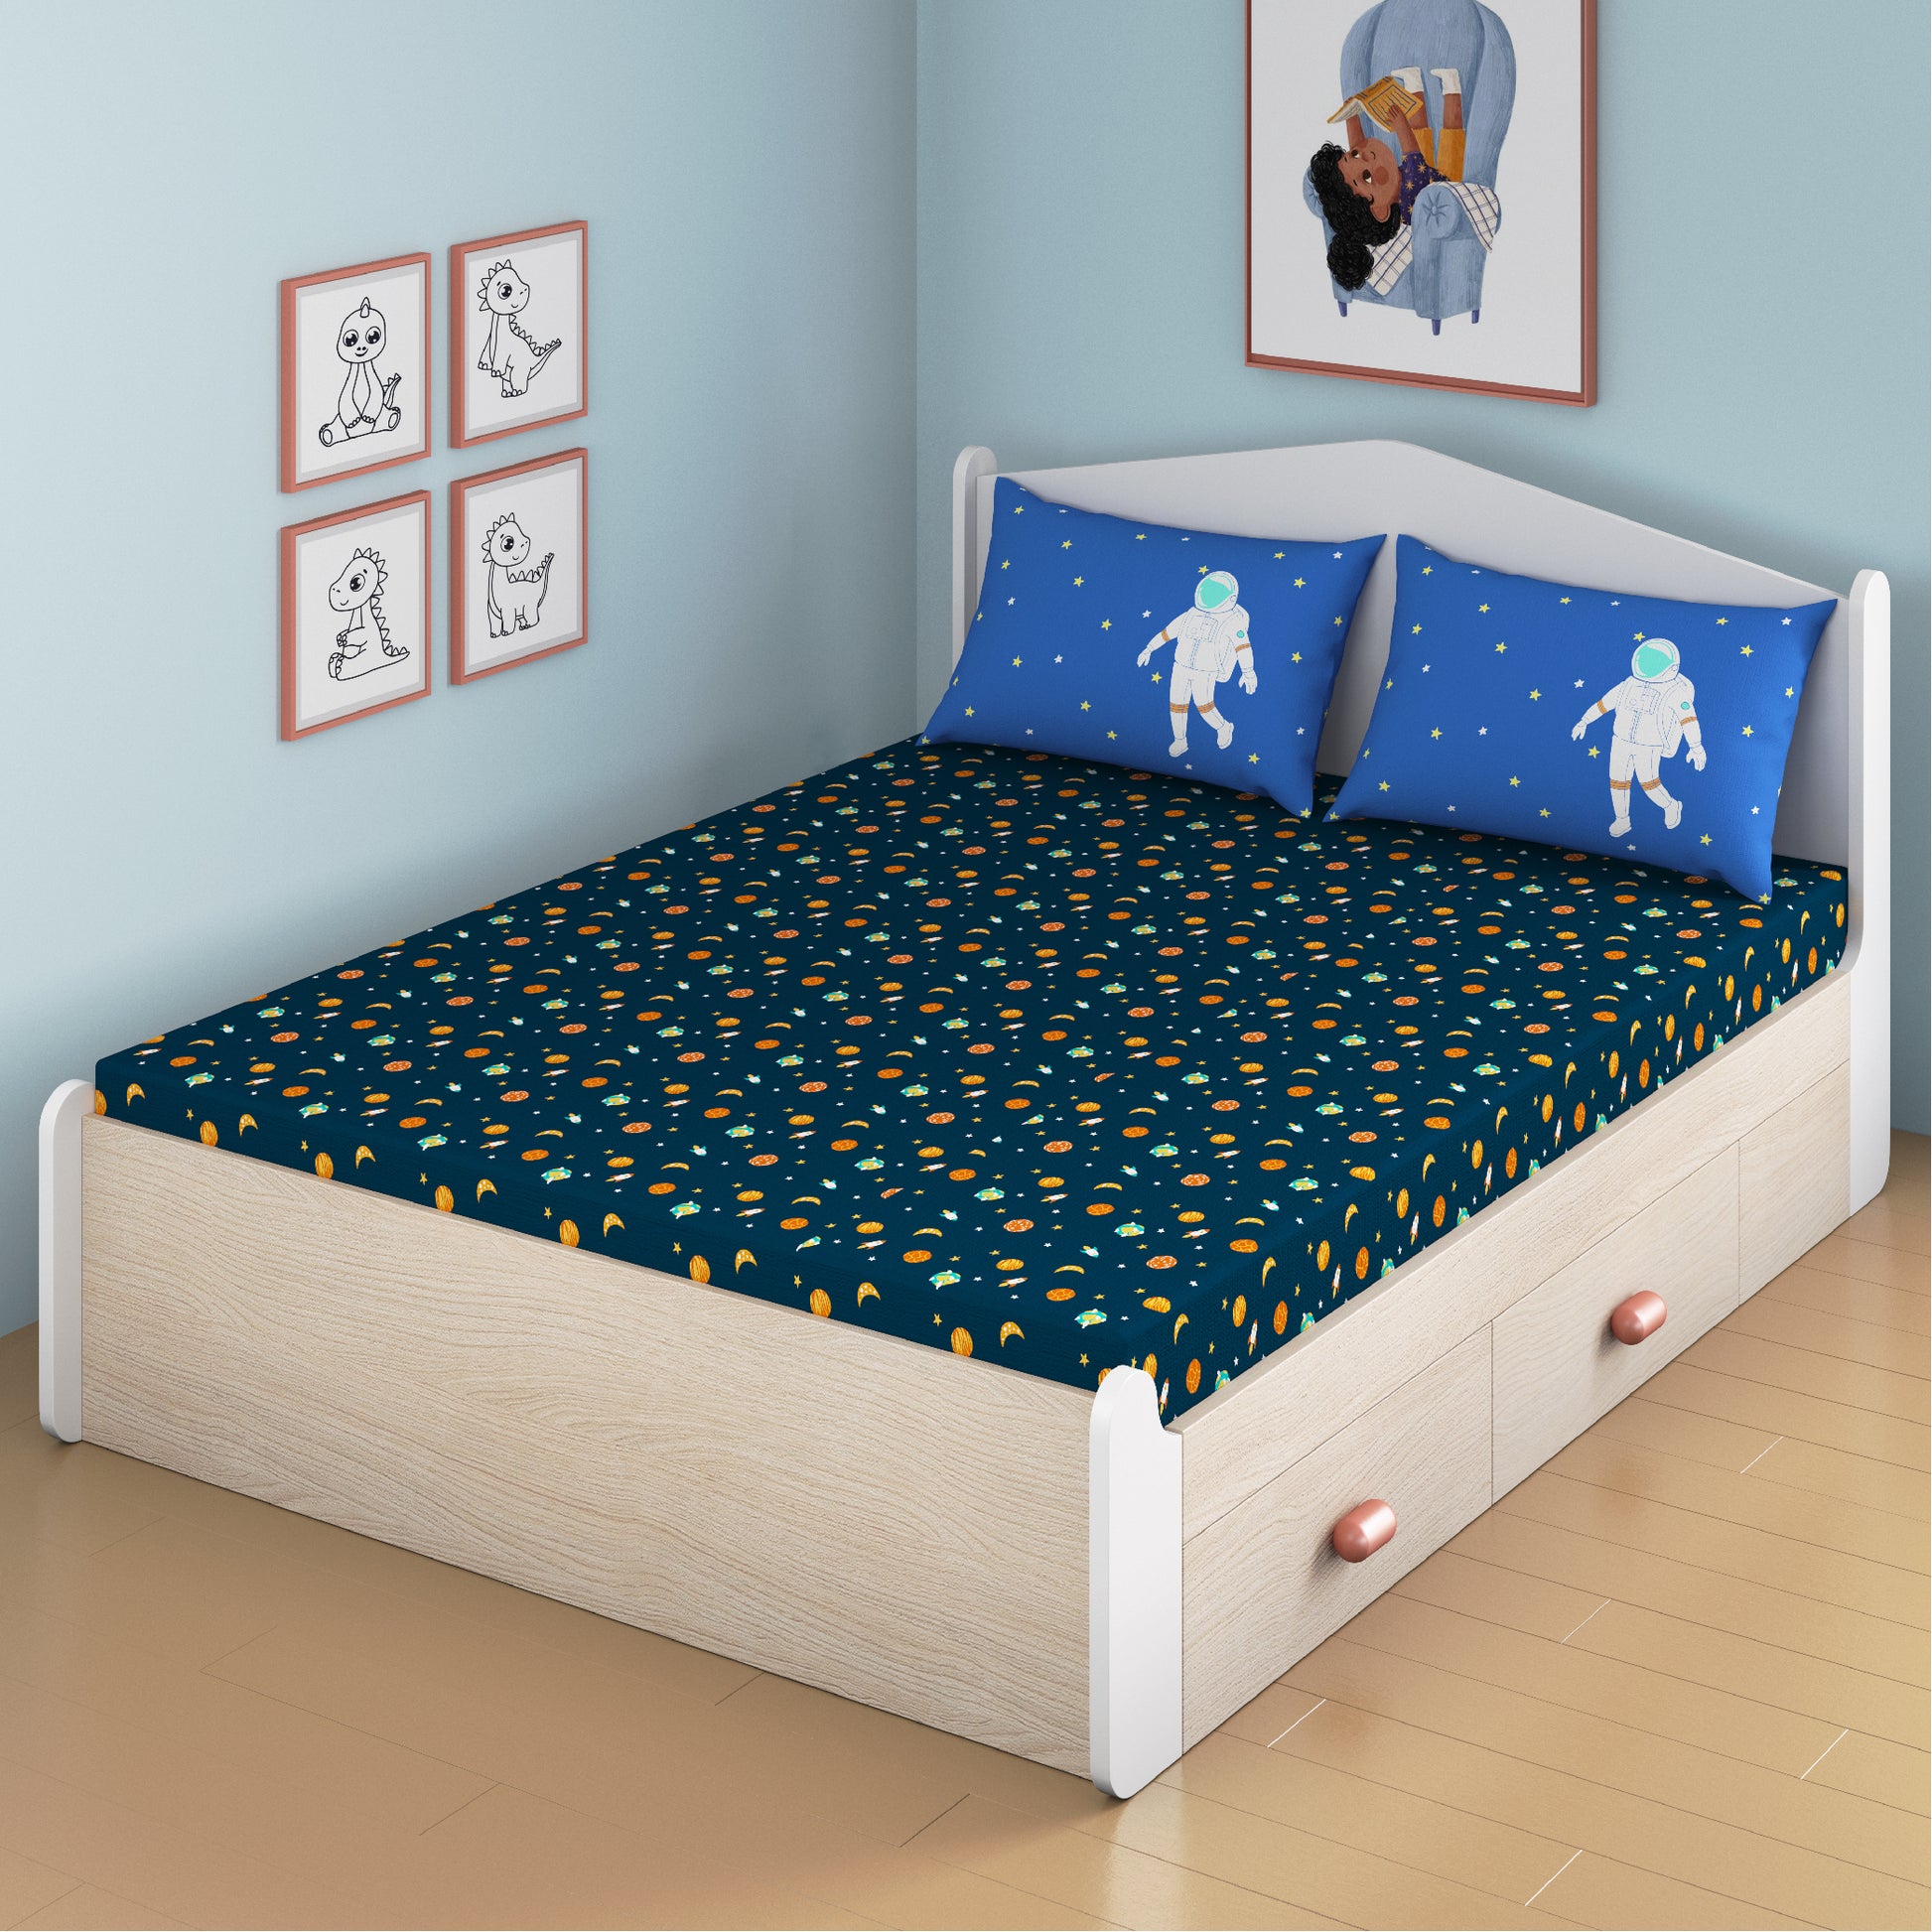 media_gallary Astronuts Fitted Bedsheet, Queen Size 1